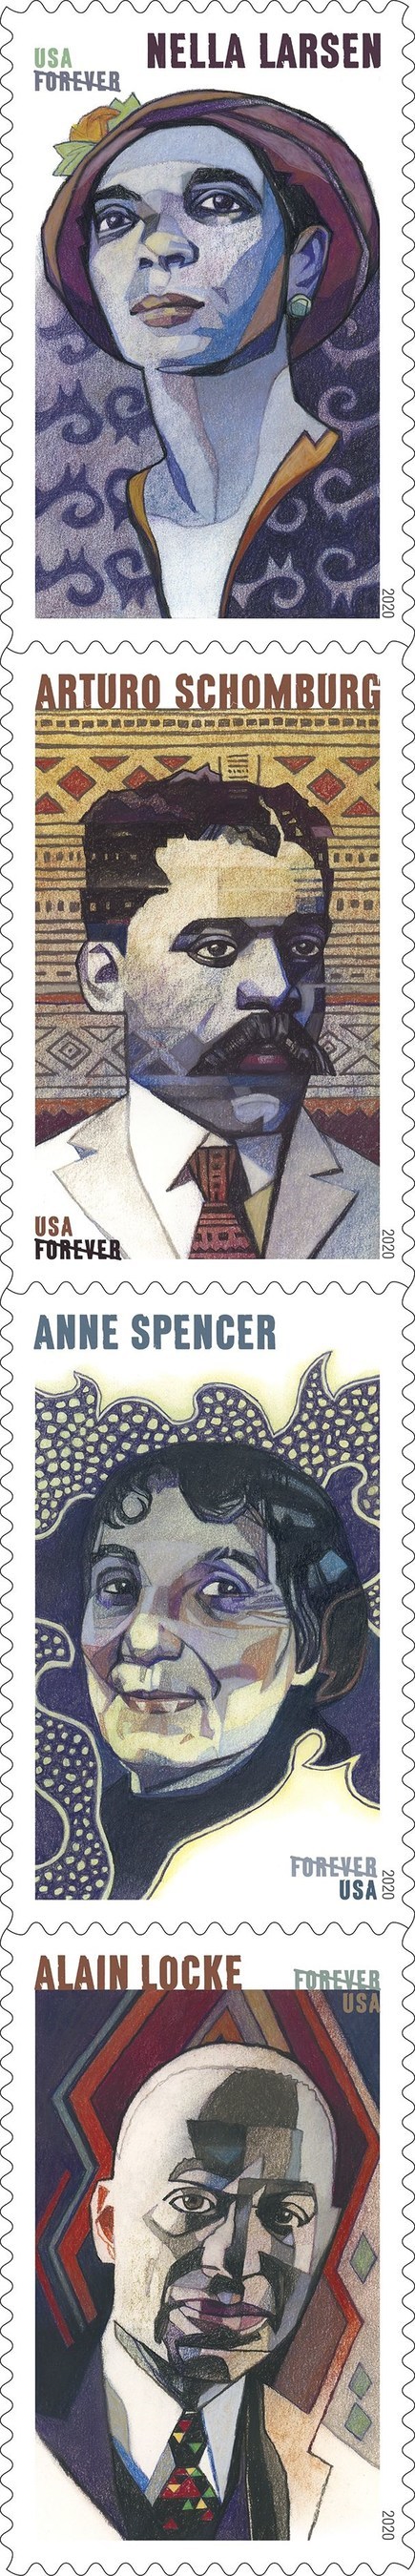 The new Voices of the Harlem Renaissance stamps honor four transformative writers of the 1920s. (PRNewsfoto/U.S. Postal Service)